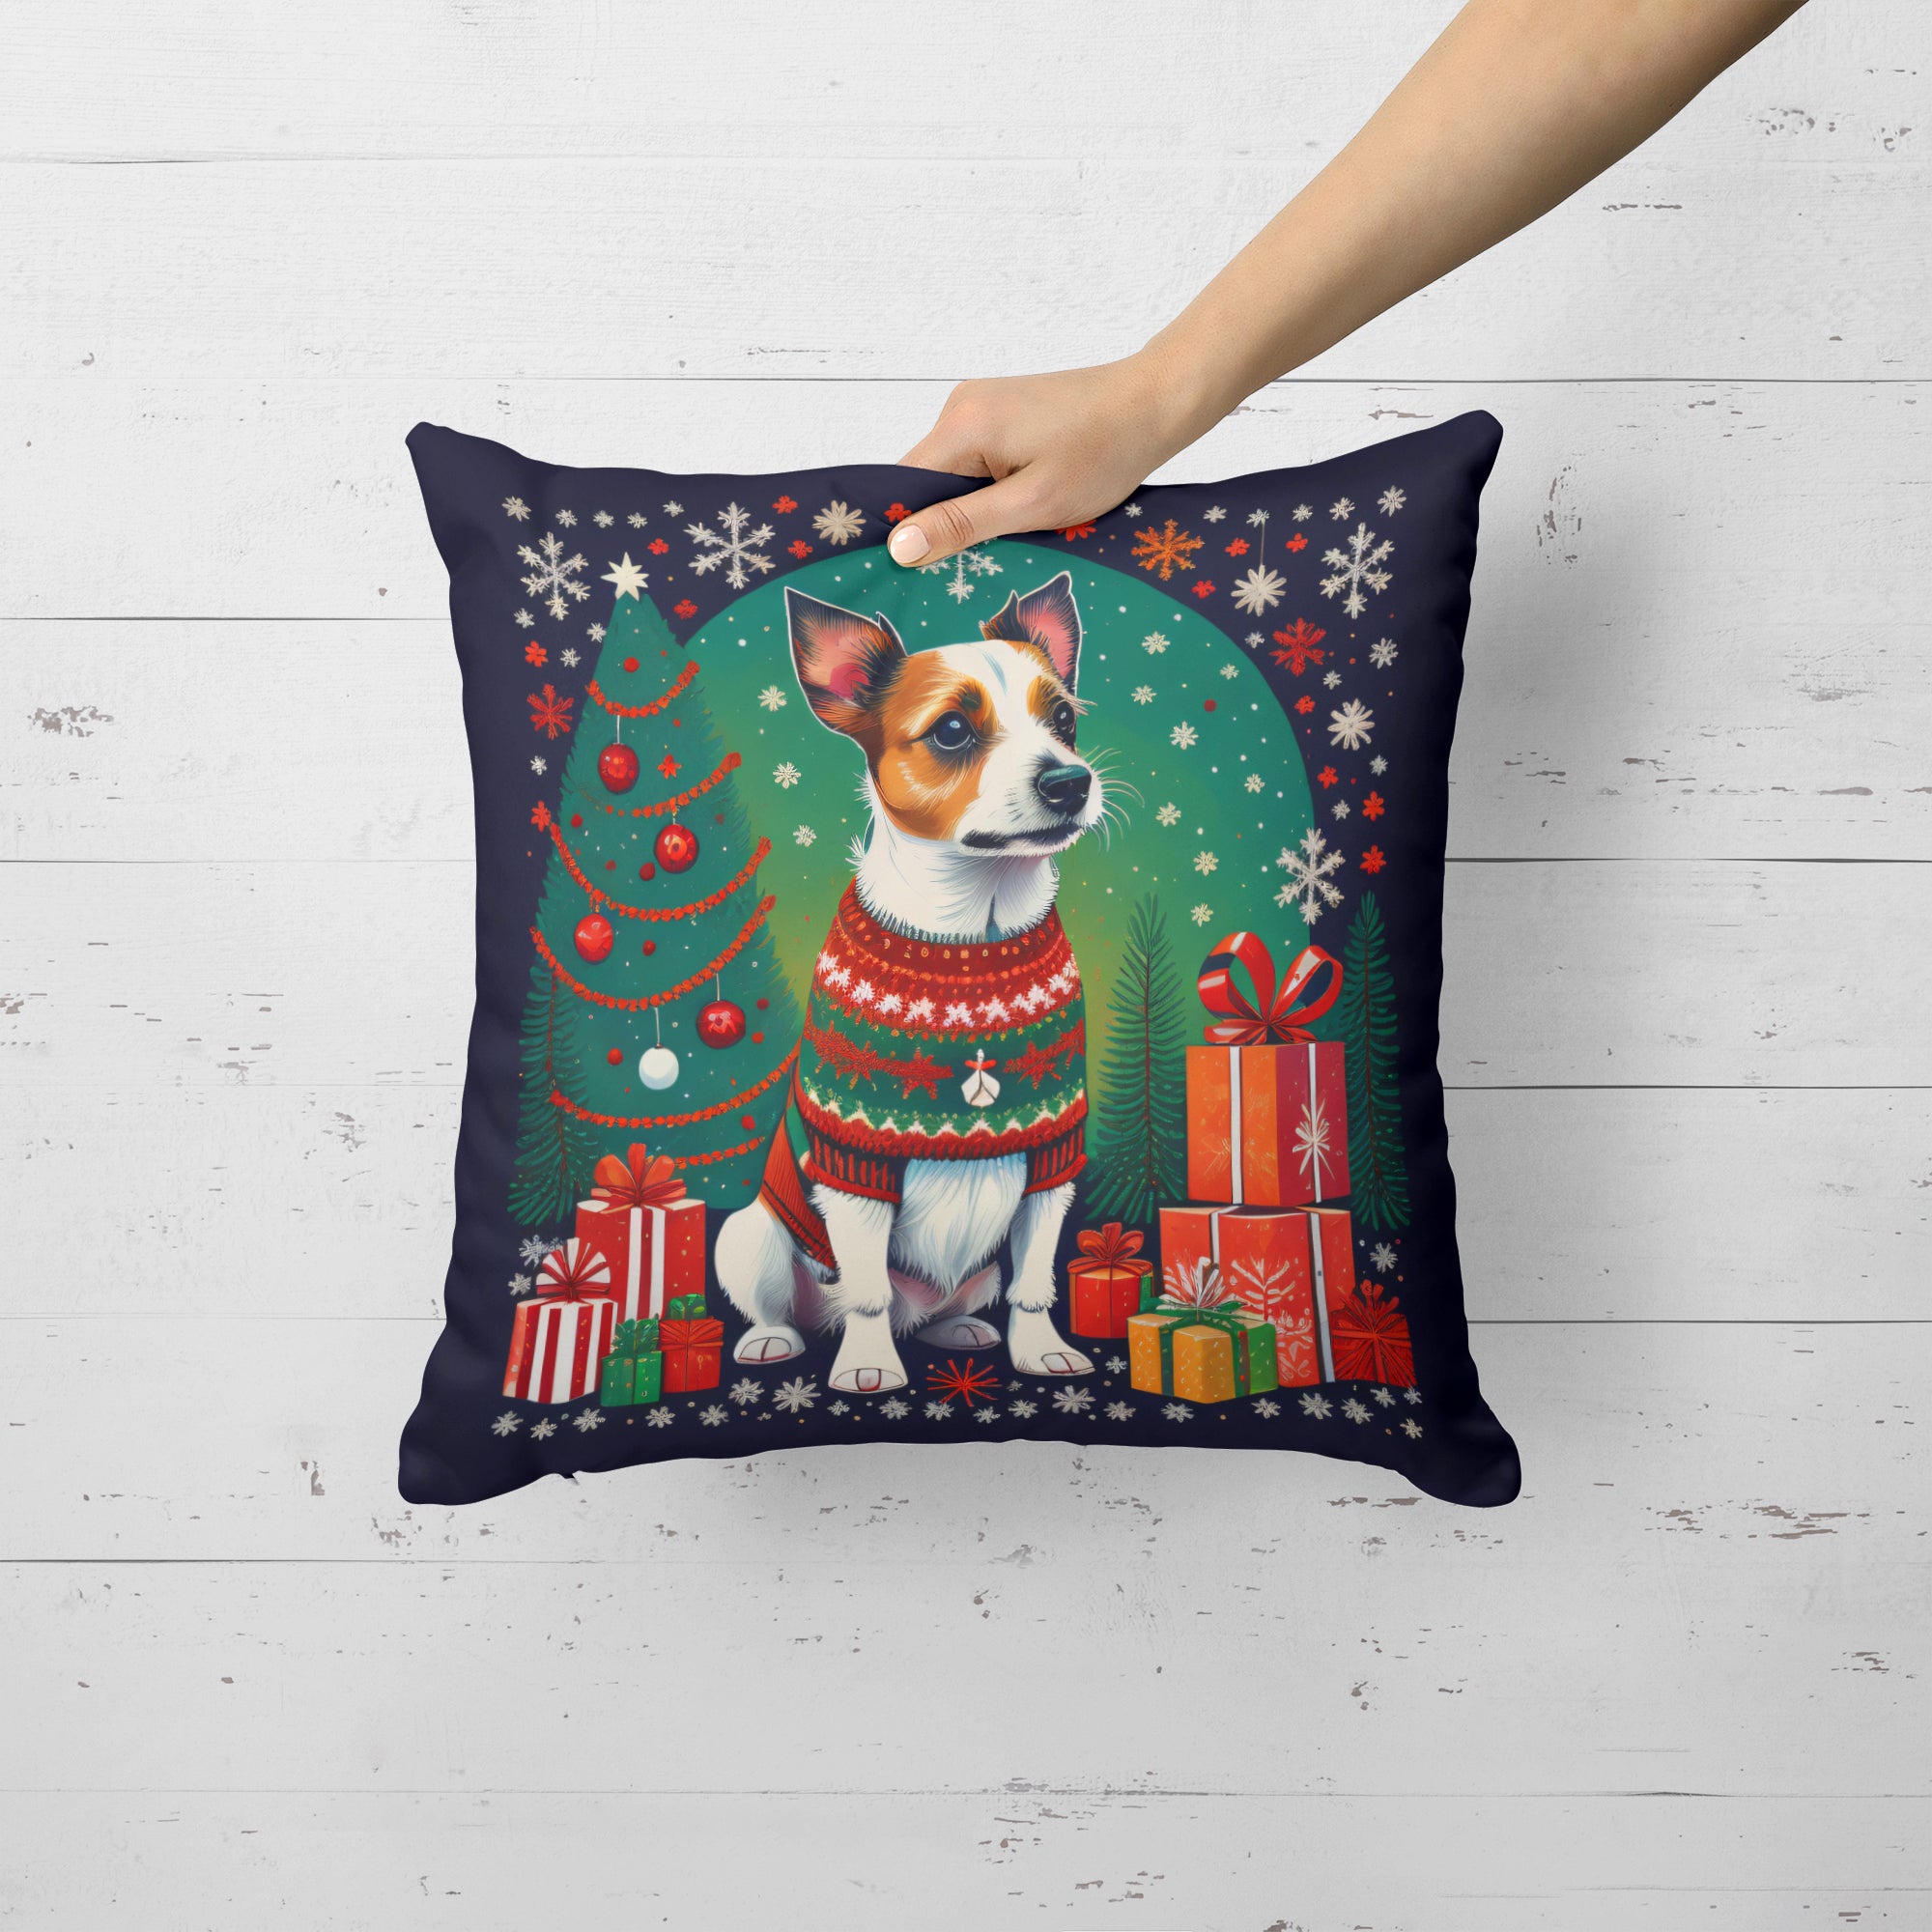 Jack Russell Terrier Christmas Fabric Decorative Pillow